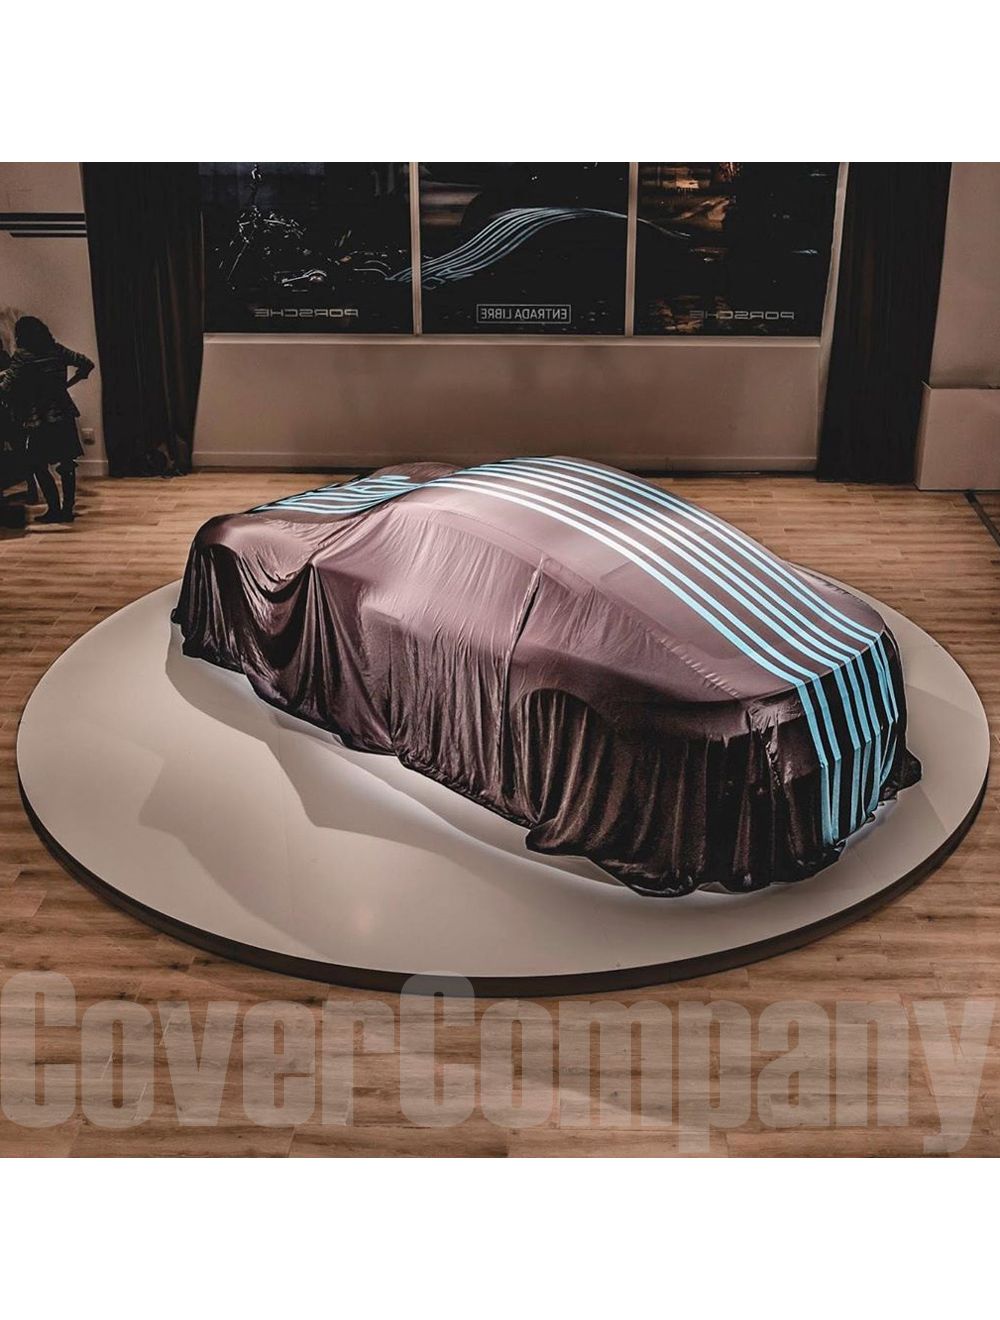 Reveal Car Covers For Porsche. Car Covers for Professionals